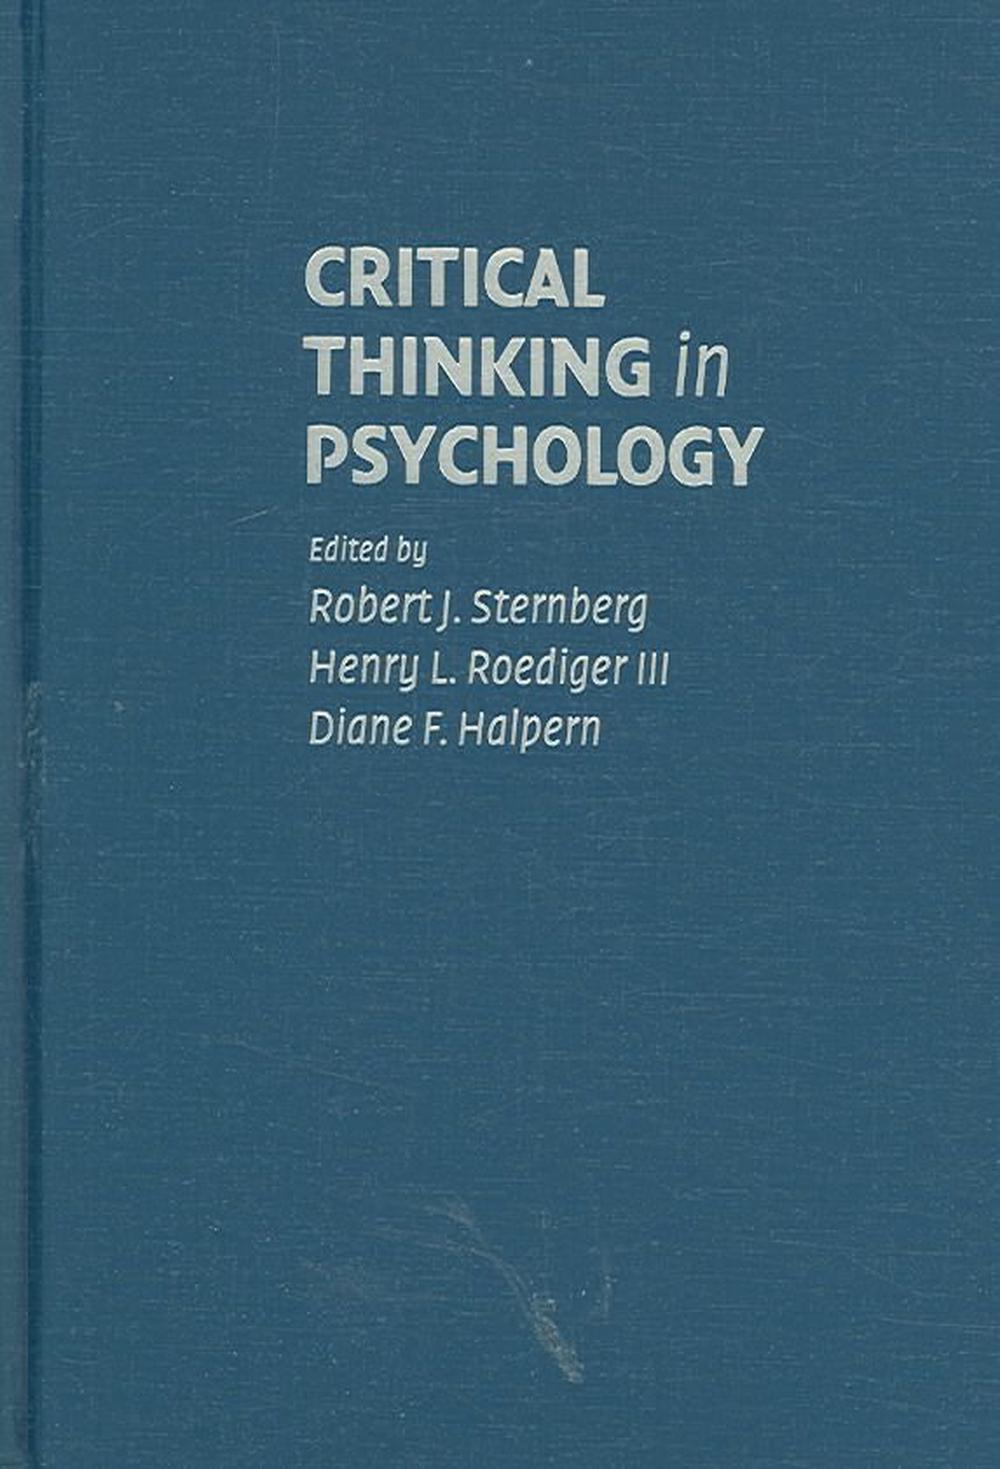 critical thinking in psychology book